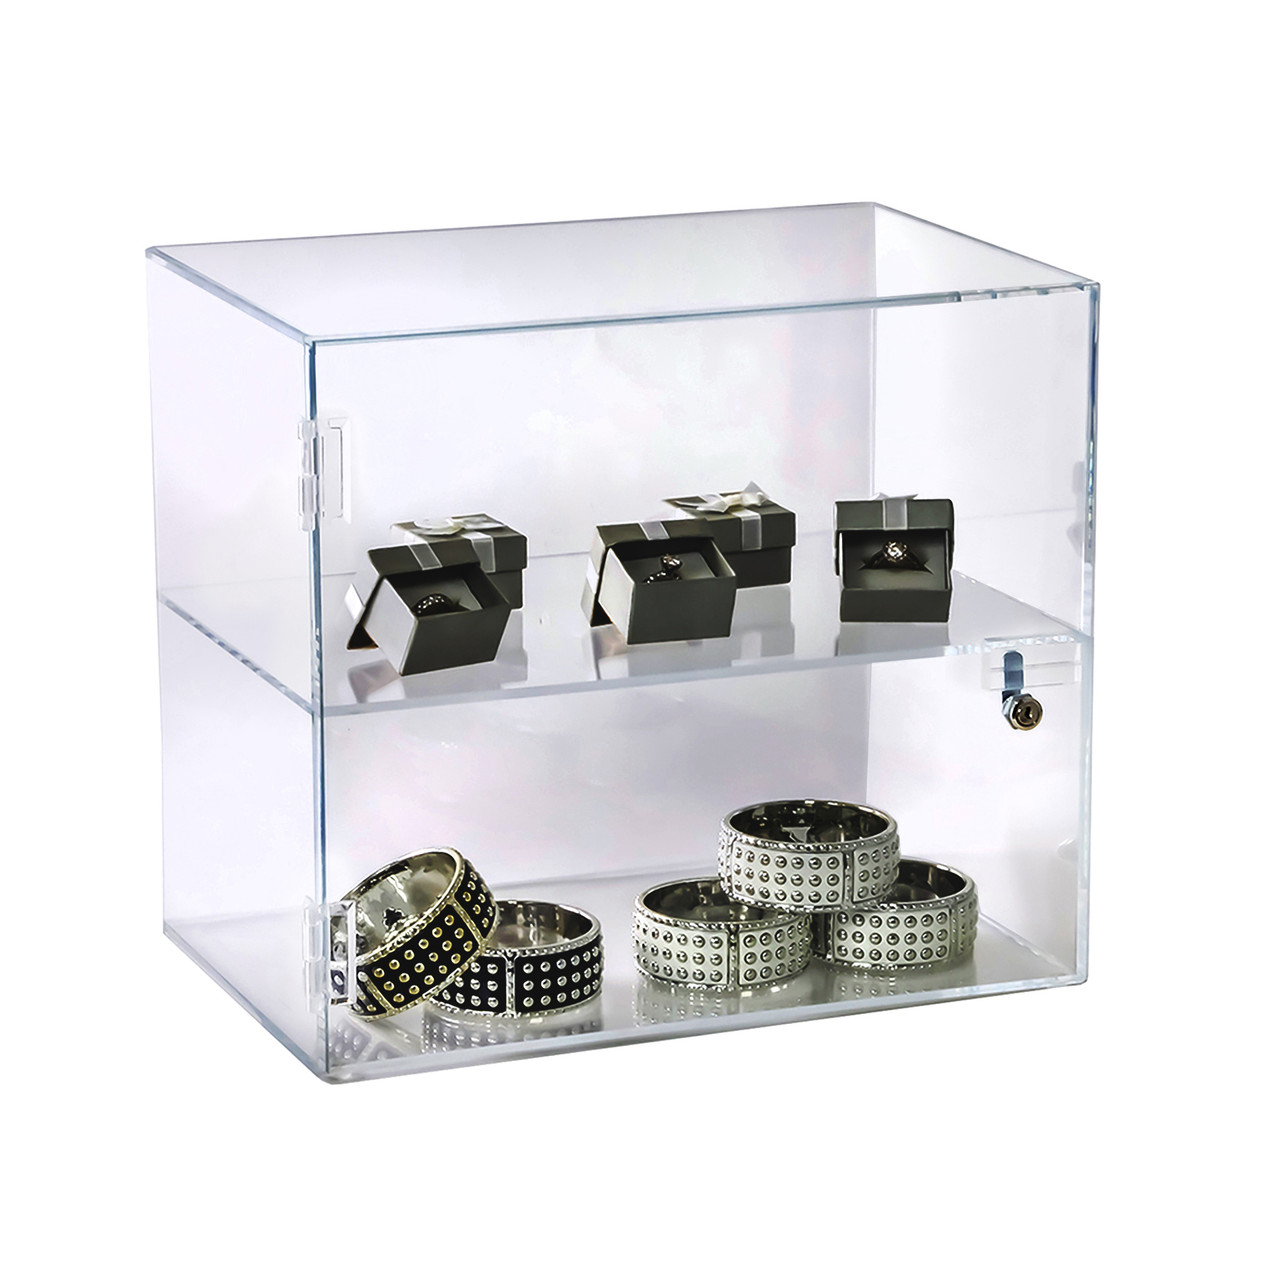 Acrylic Counter Top Display 12 x 7 x 20 Locking Security Showcase diff spacing 